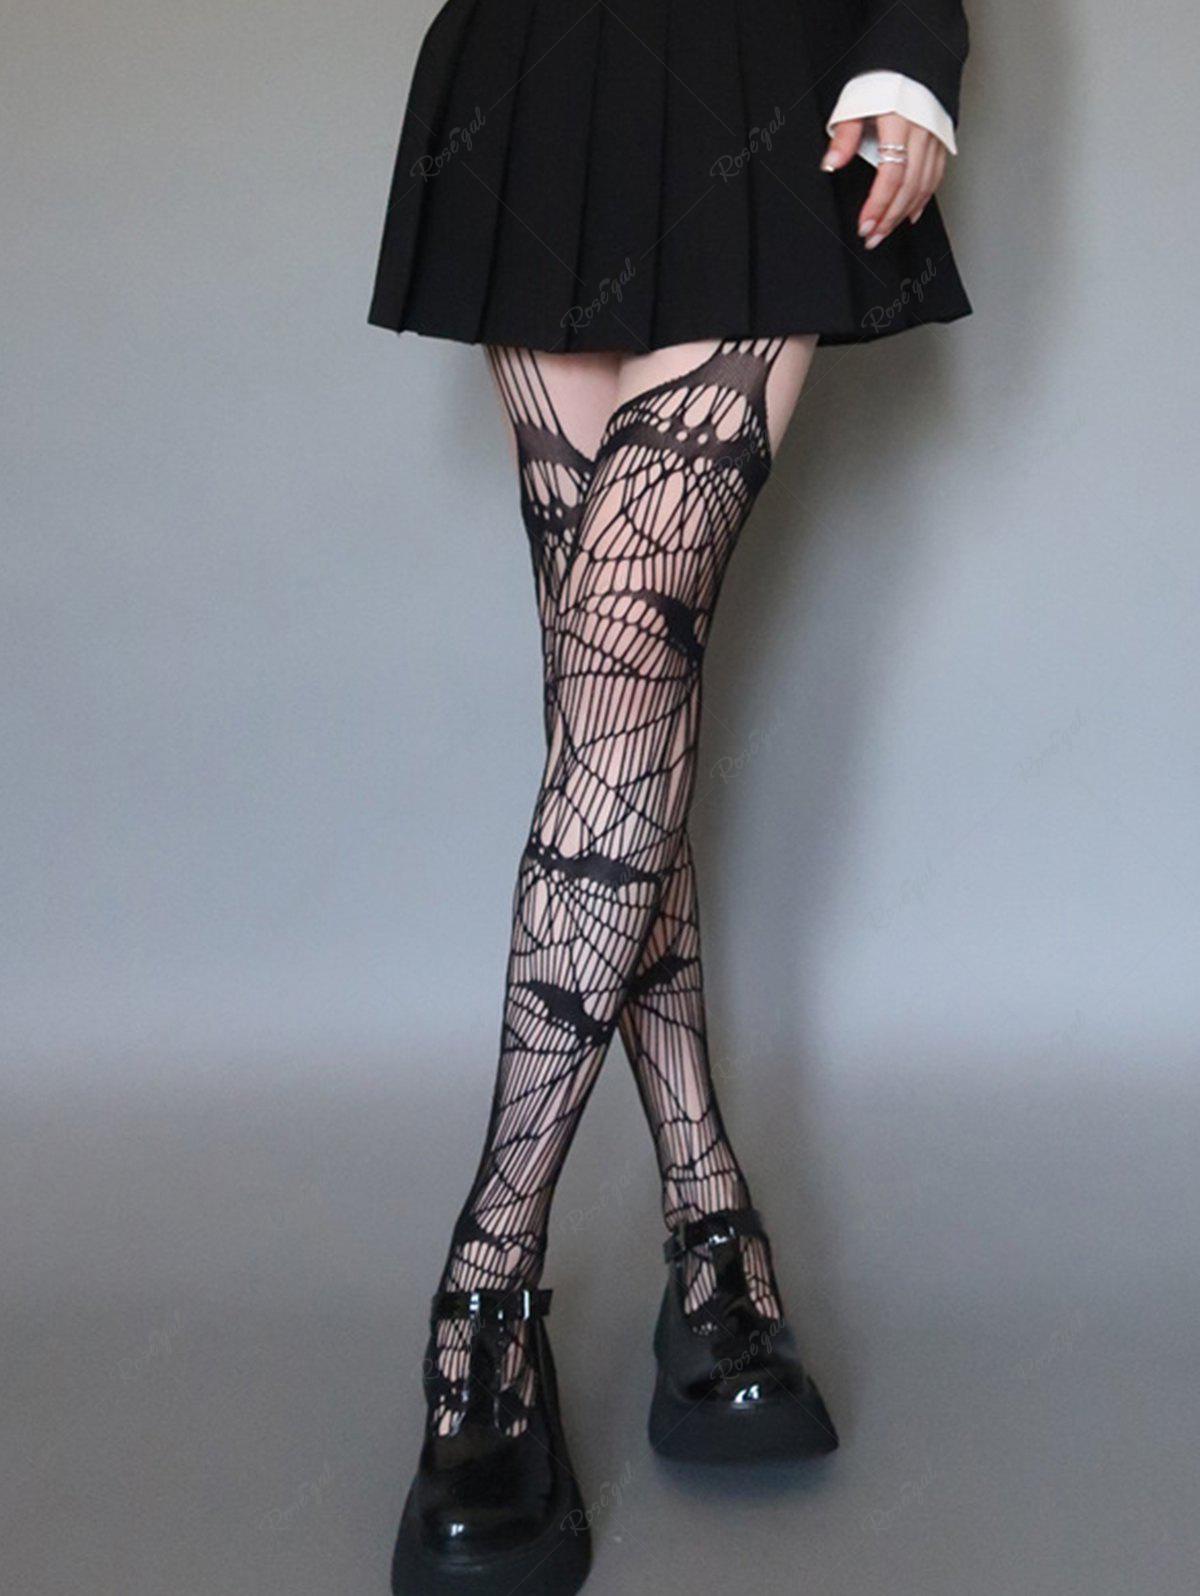 Bat Fishnet Hollow Out Suspender Stockings